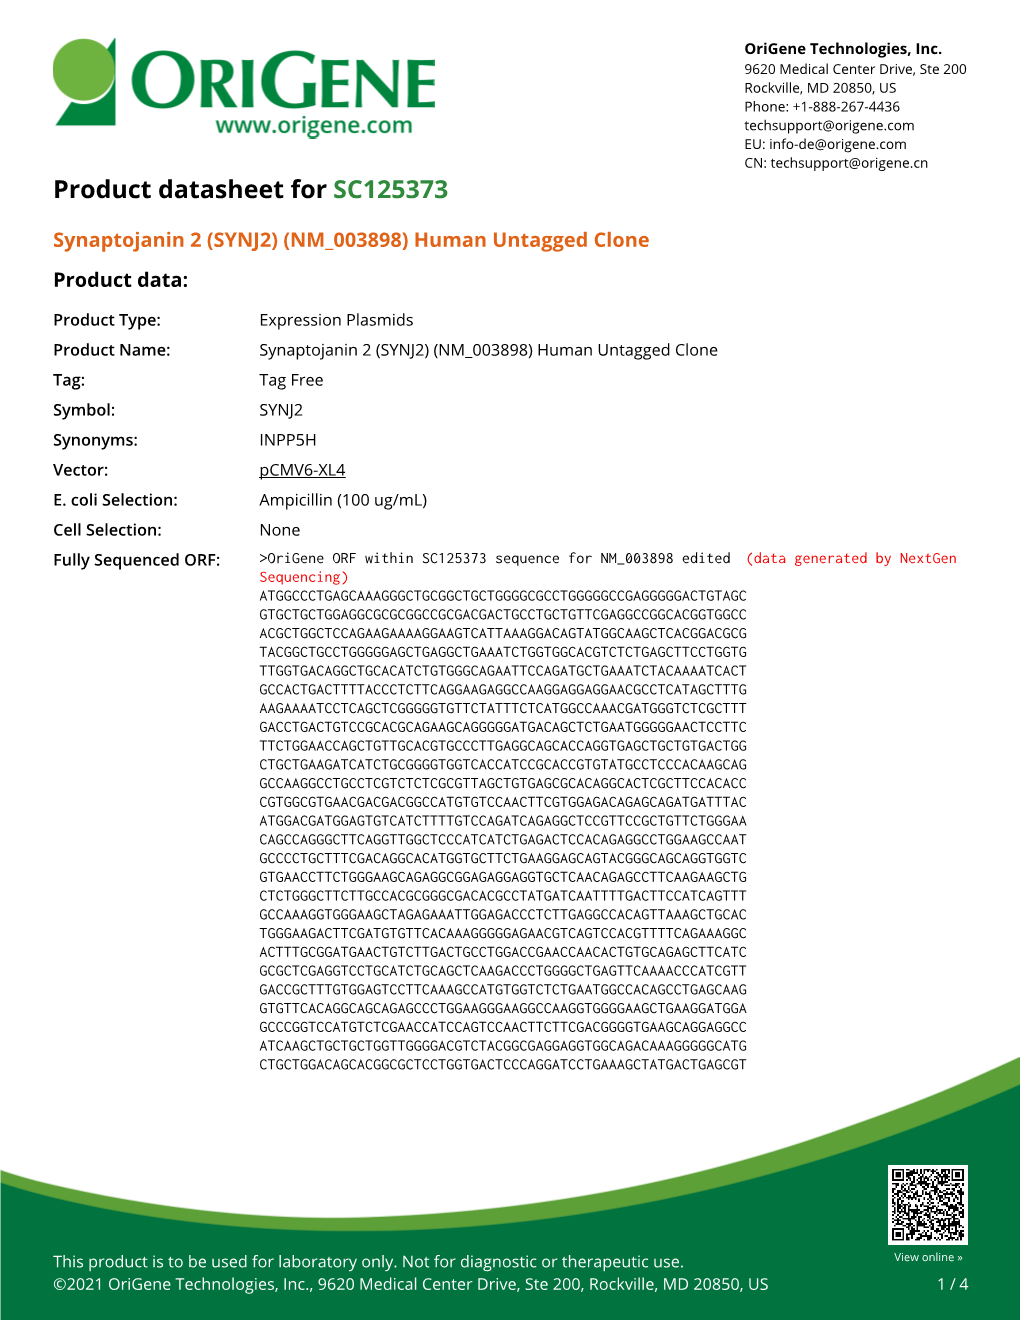 (SYNJ2) (NM 003898) Human Untagged Clone Product Data